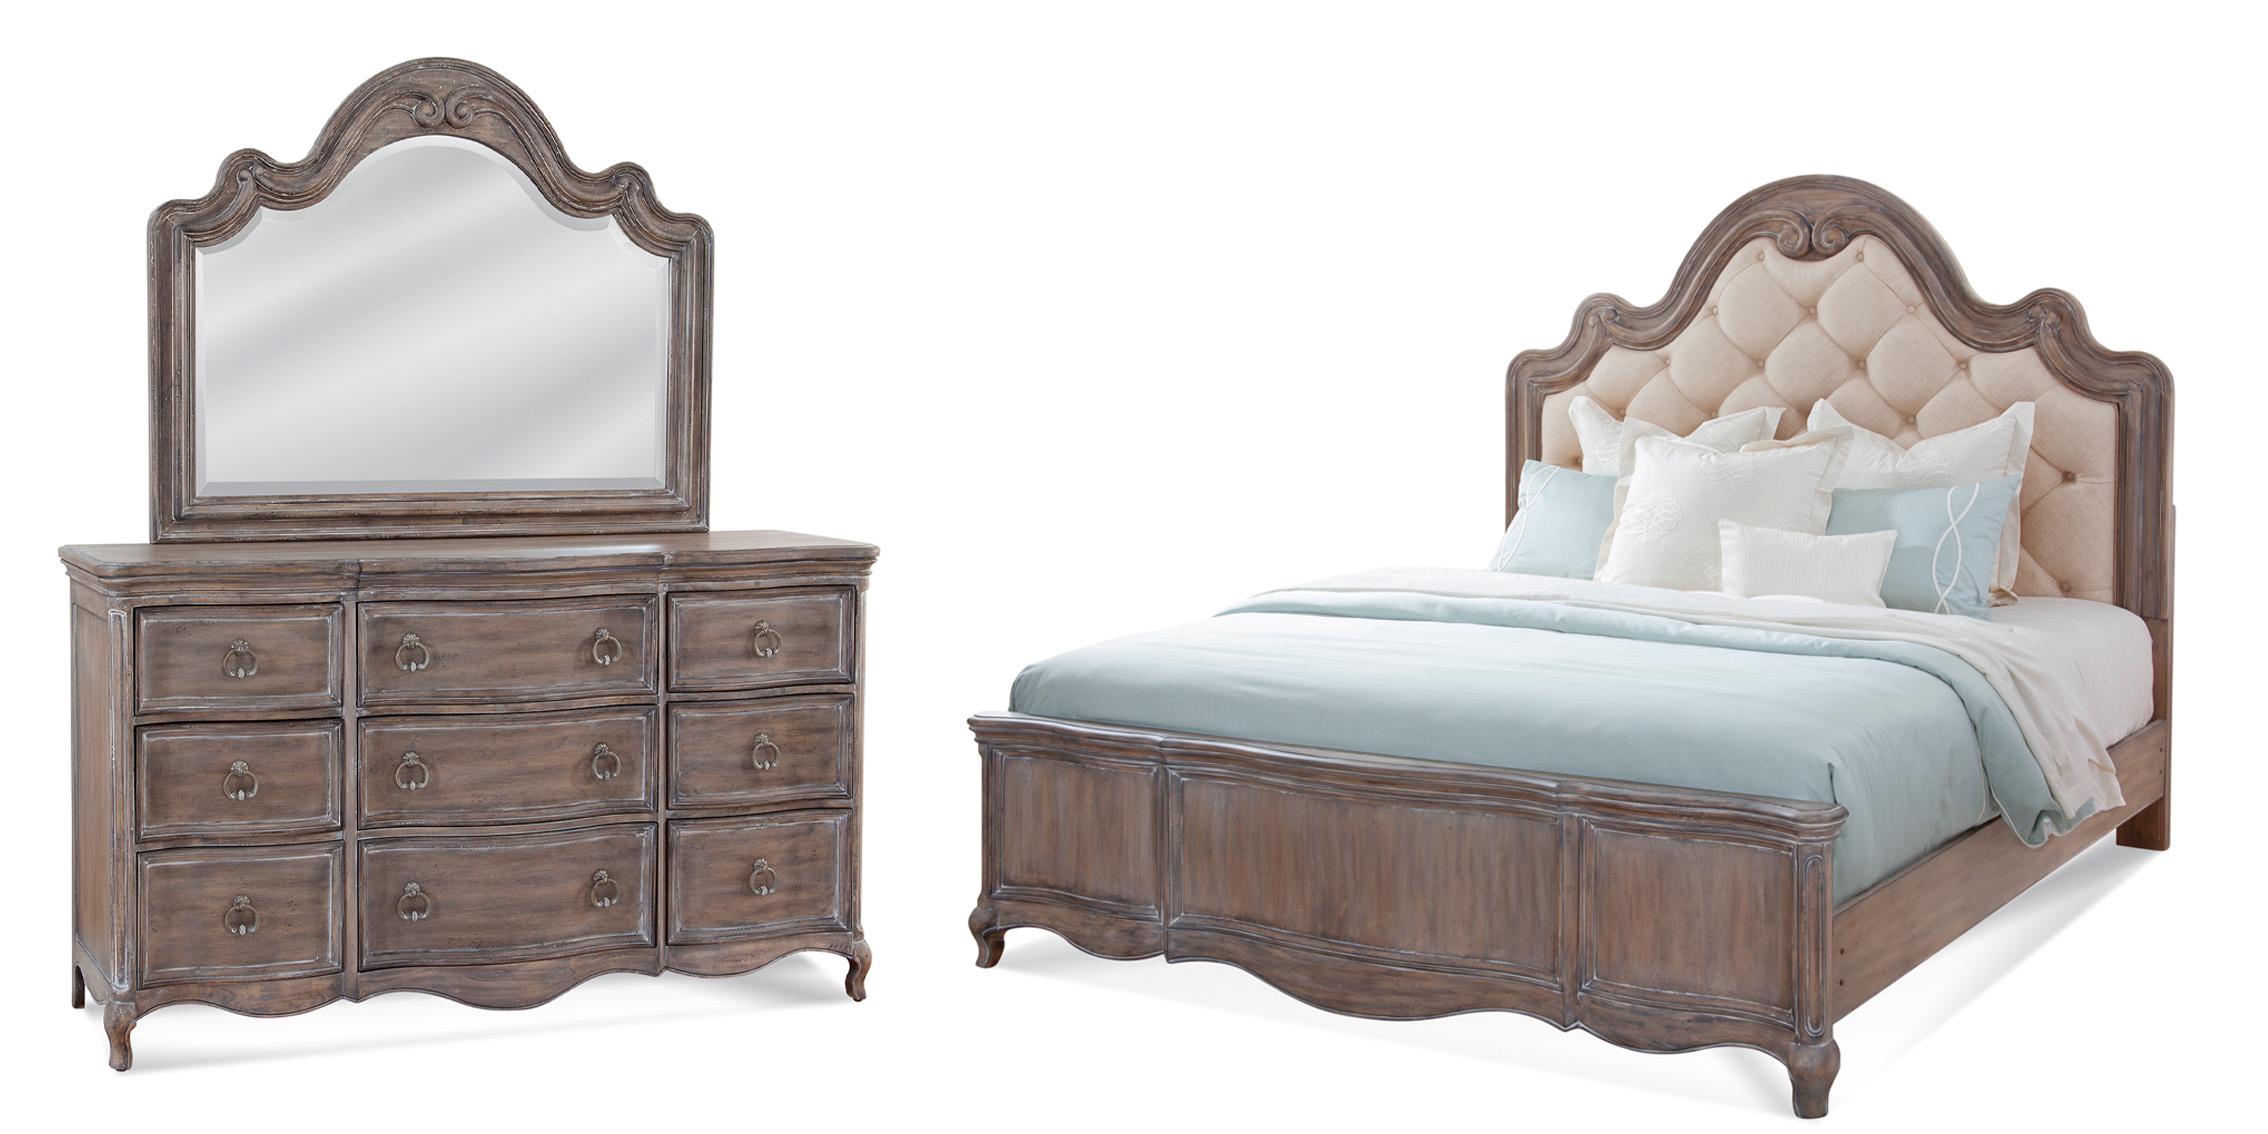 Classic, Traditional Panel Bedroom Set GENOA 1575-50TUPH 1575-QTUPN-3PC in Antique, Gray Fabric